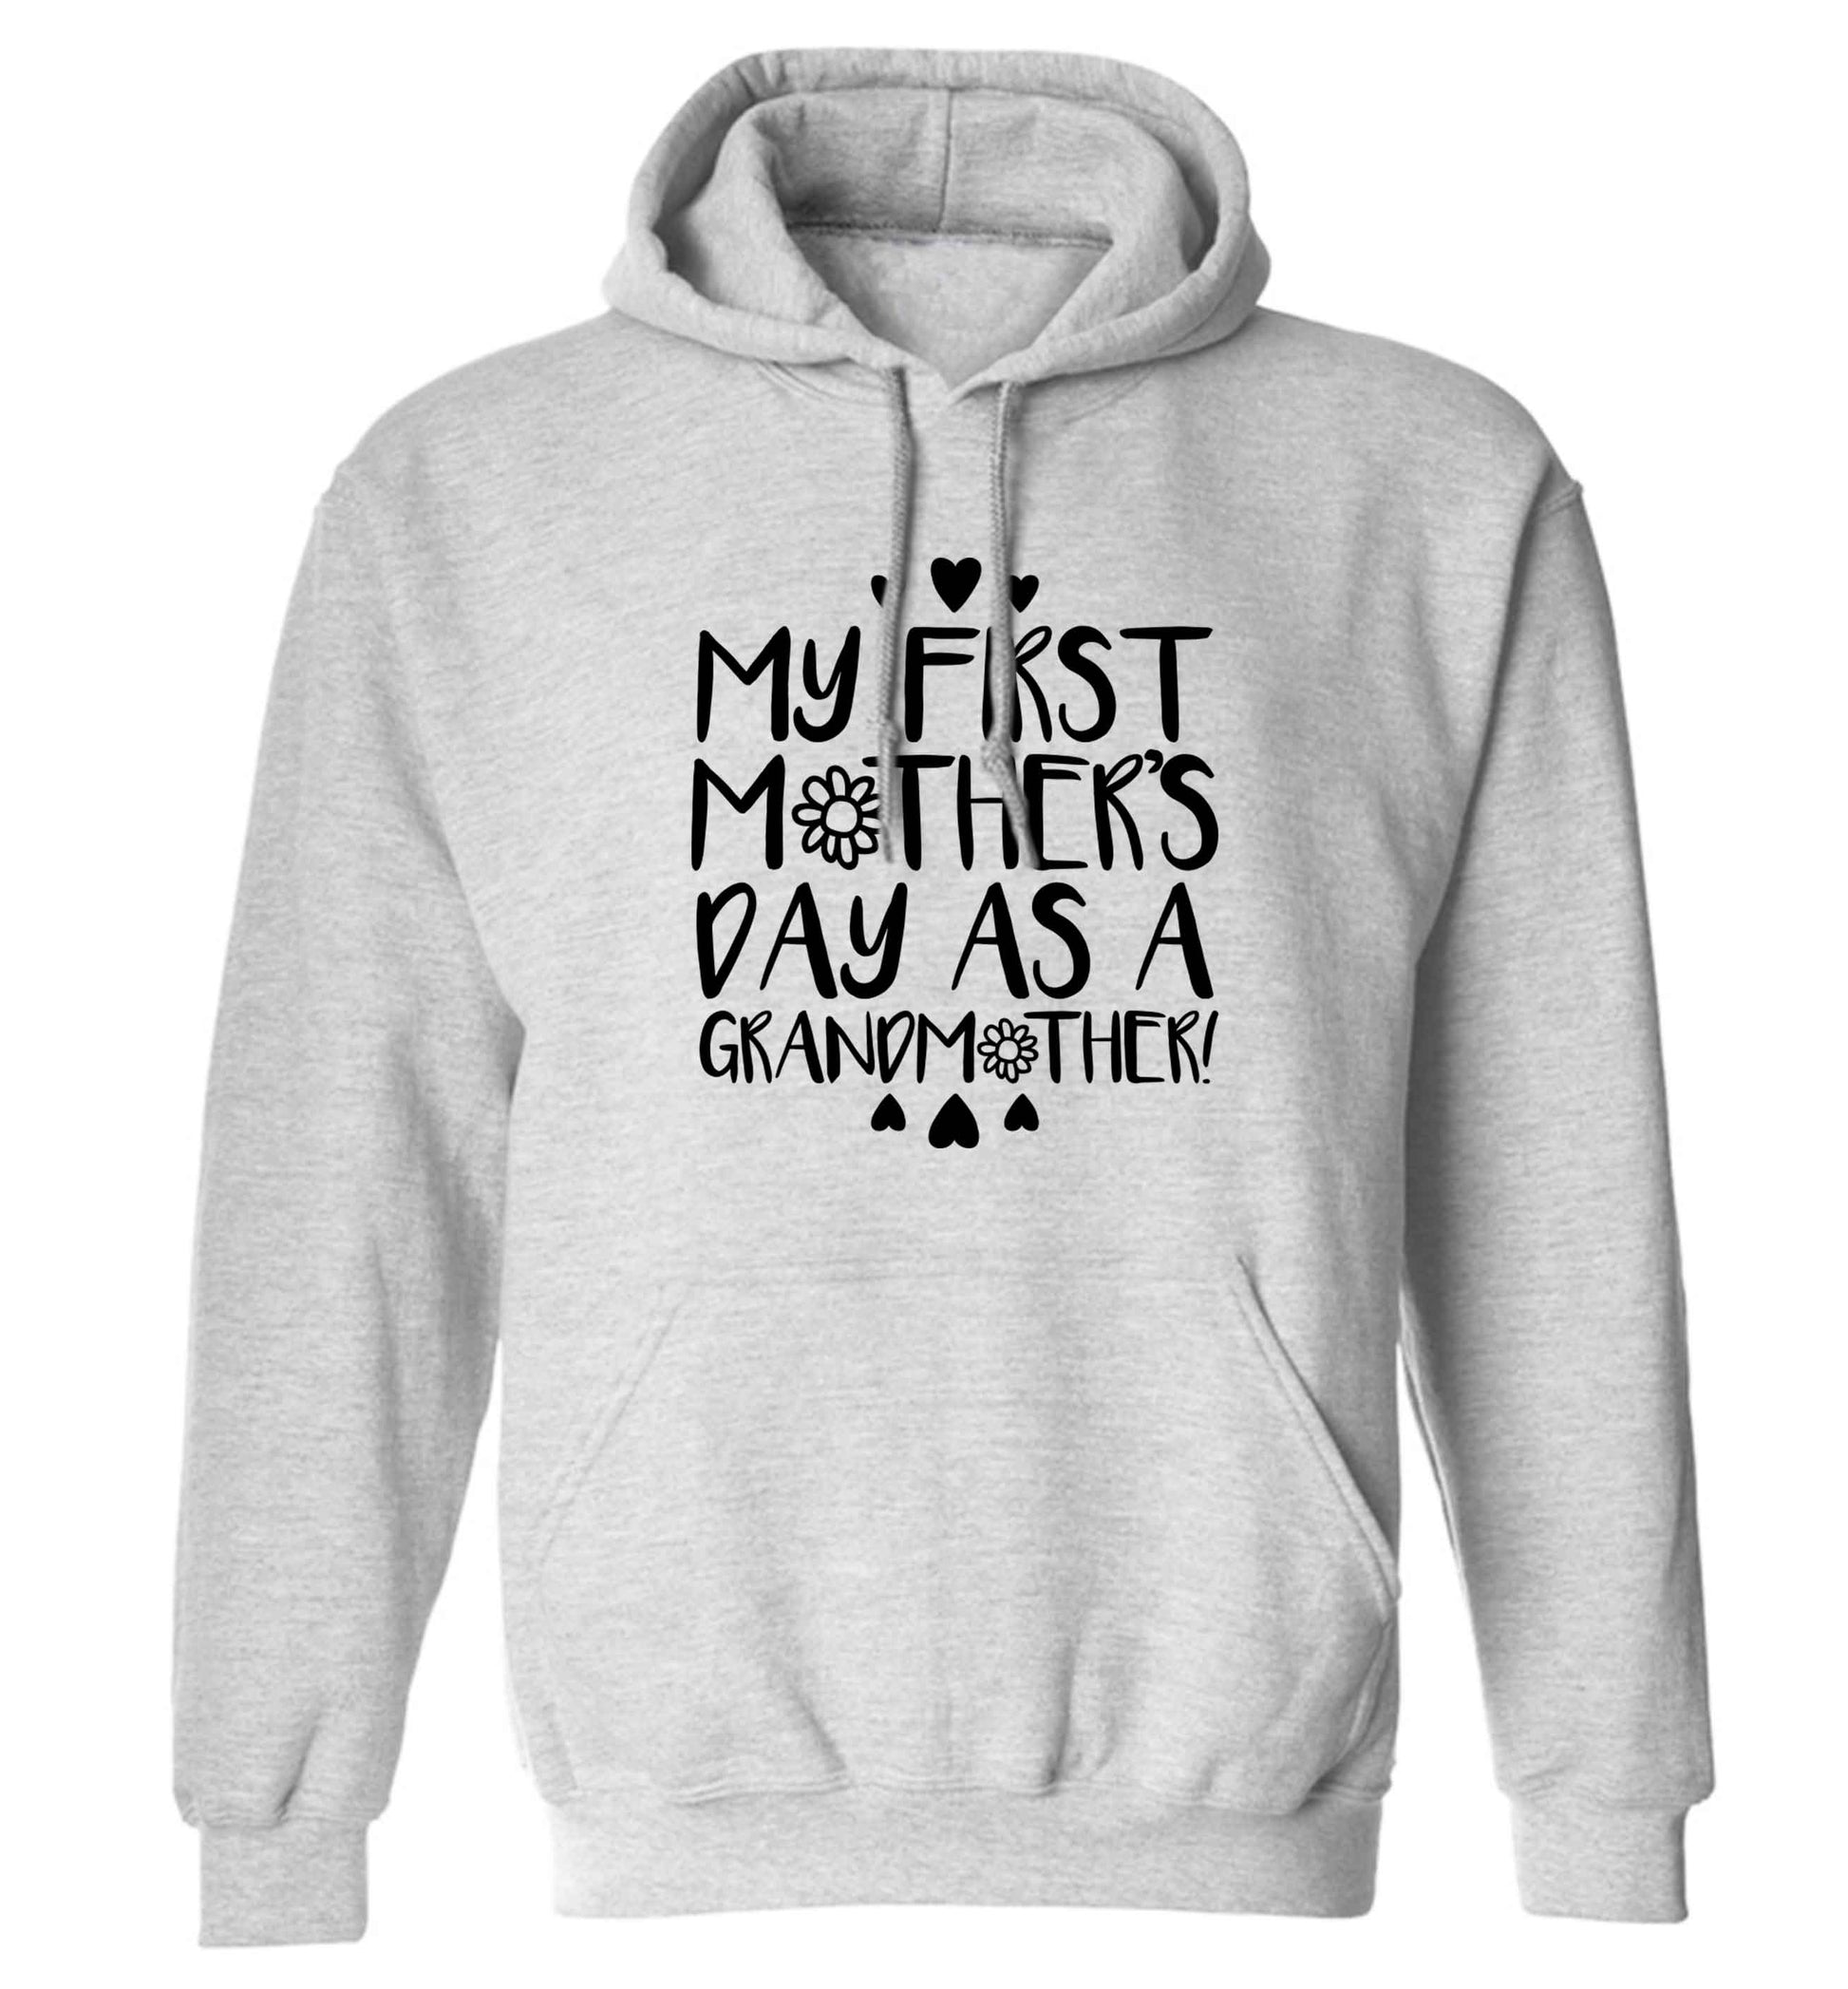 It's my first mother's day as a grandmother adults unisex grey hoodie 2XL